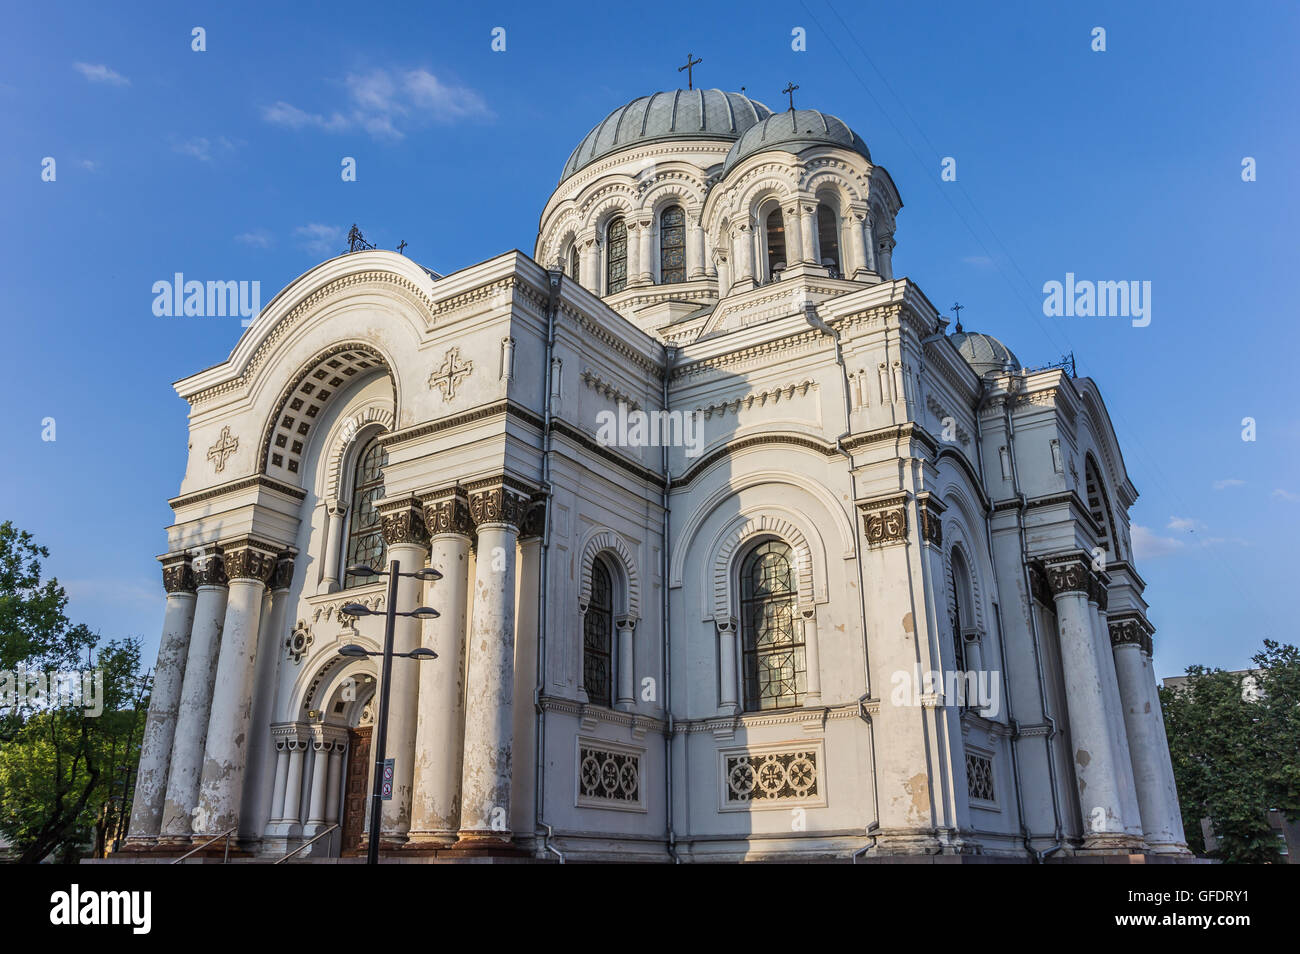 The St. Michael the Archangel church in Kaunas, Lithuania Stock Photo